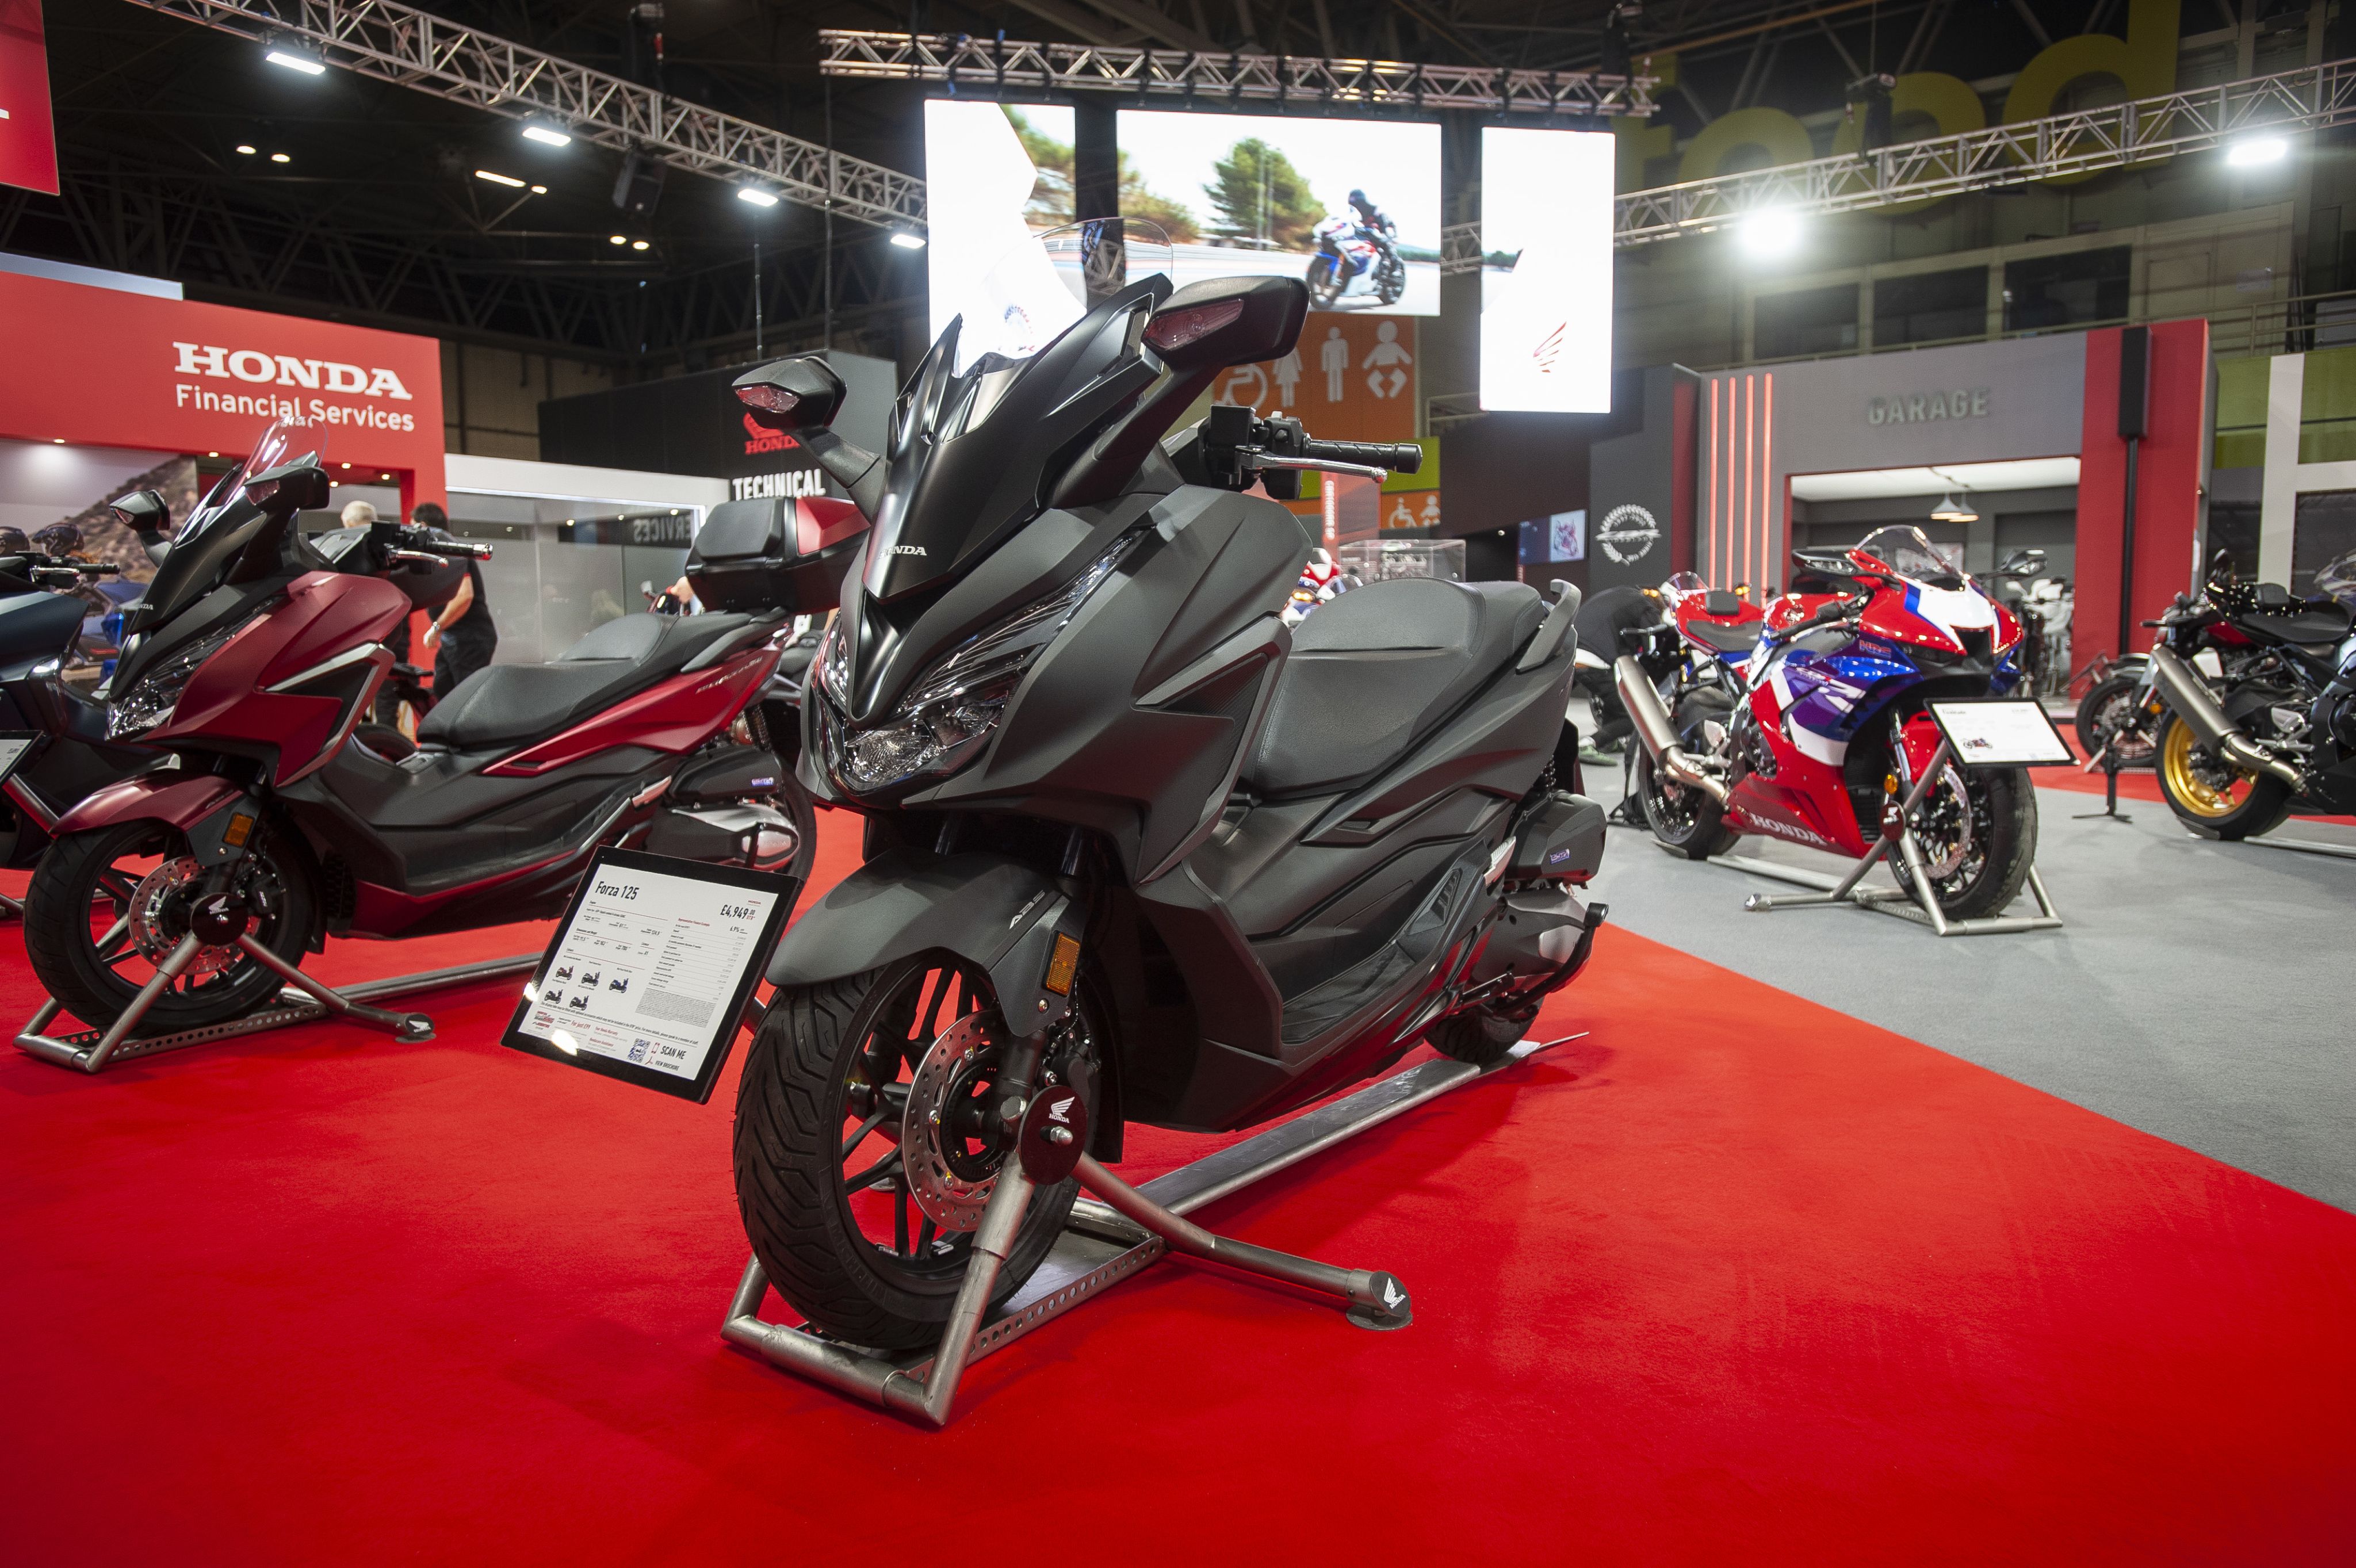 EICMA 2021: Honda ADV350 - 330 cc adventure-styled scooter with